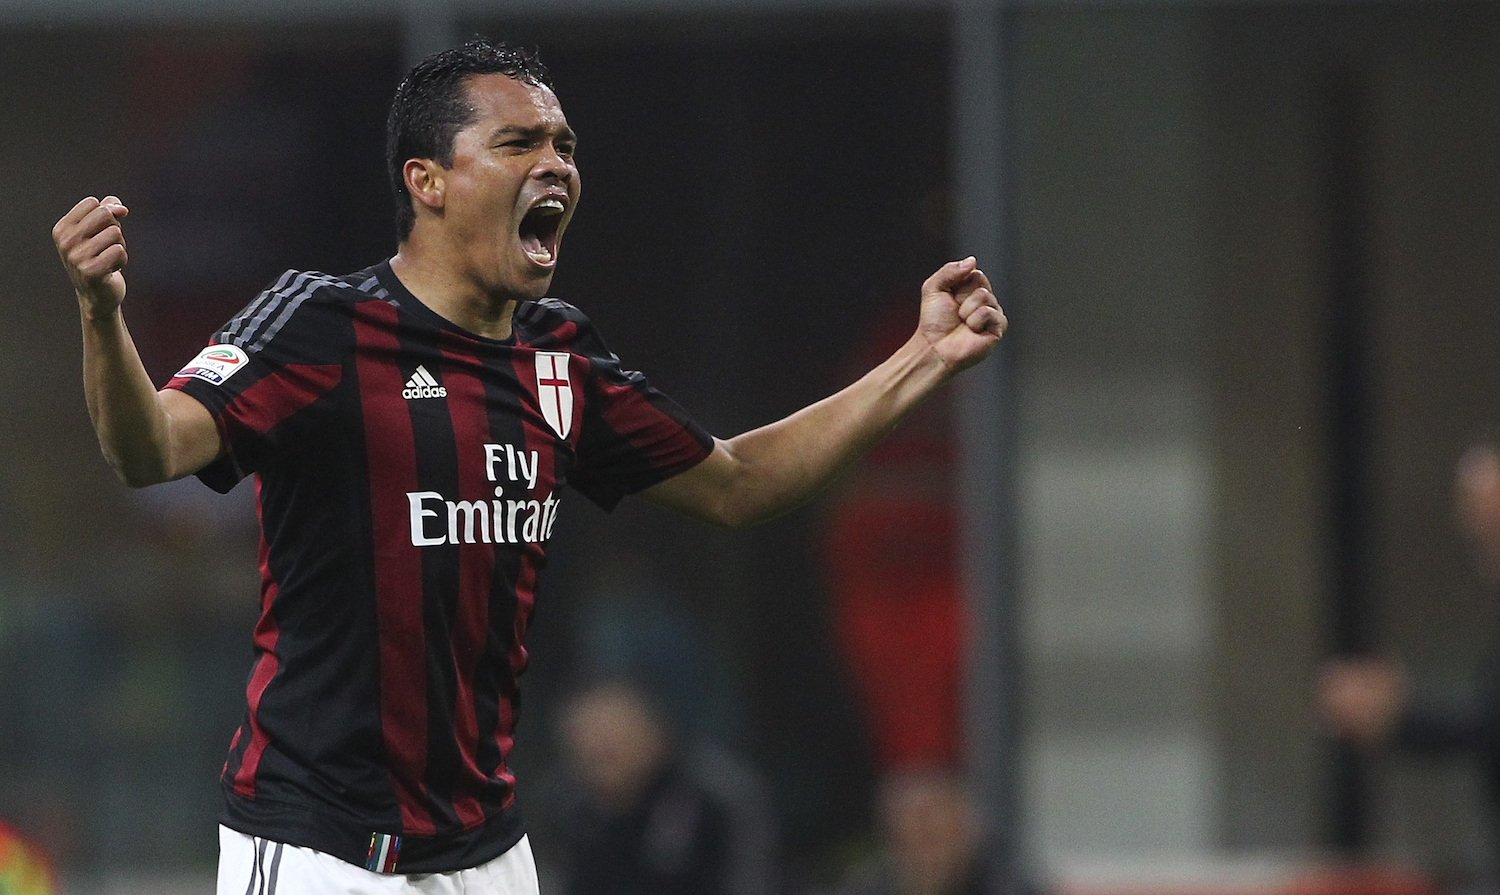 Bacca calmly converts to tie proceedings. | Marco Luzzani/Getty Images